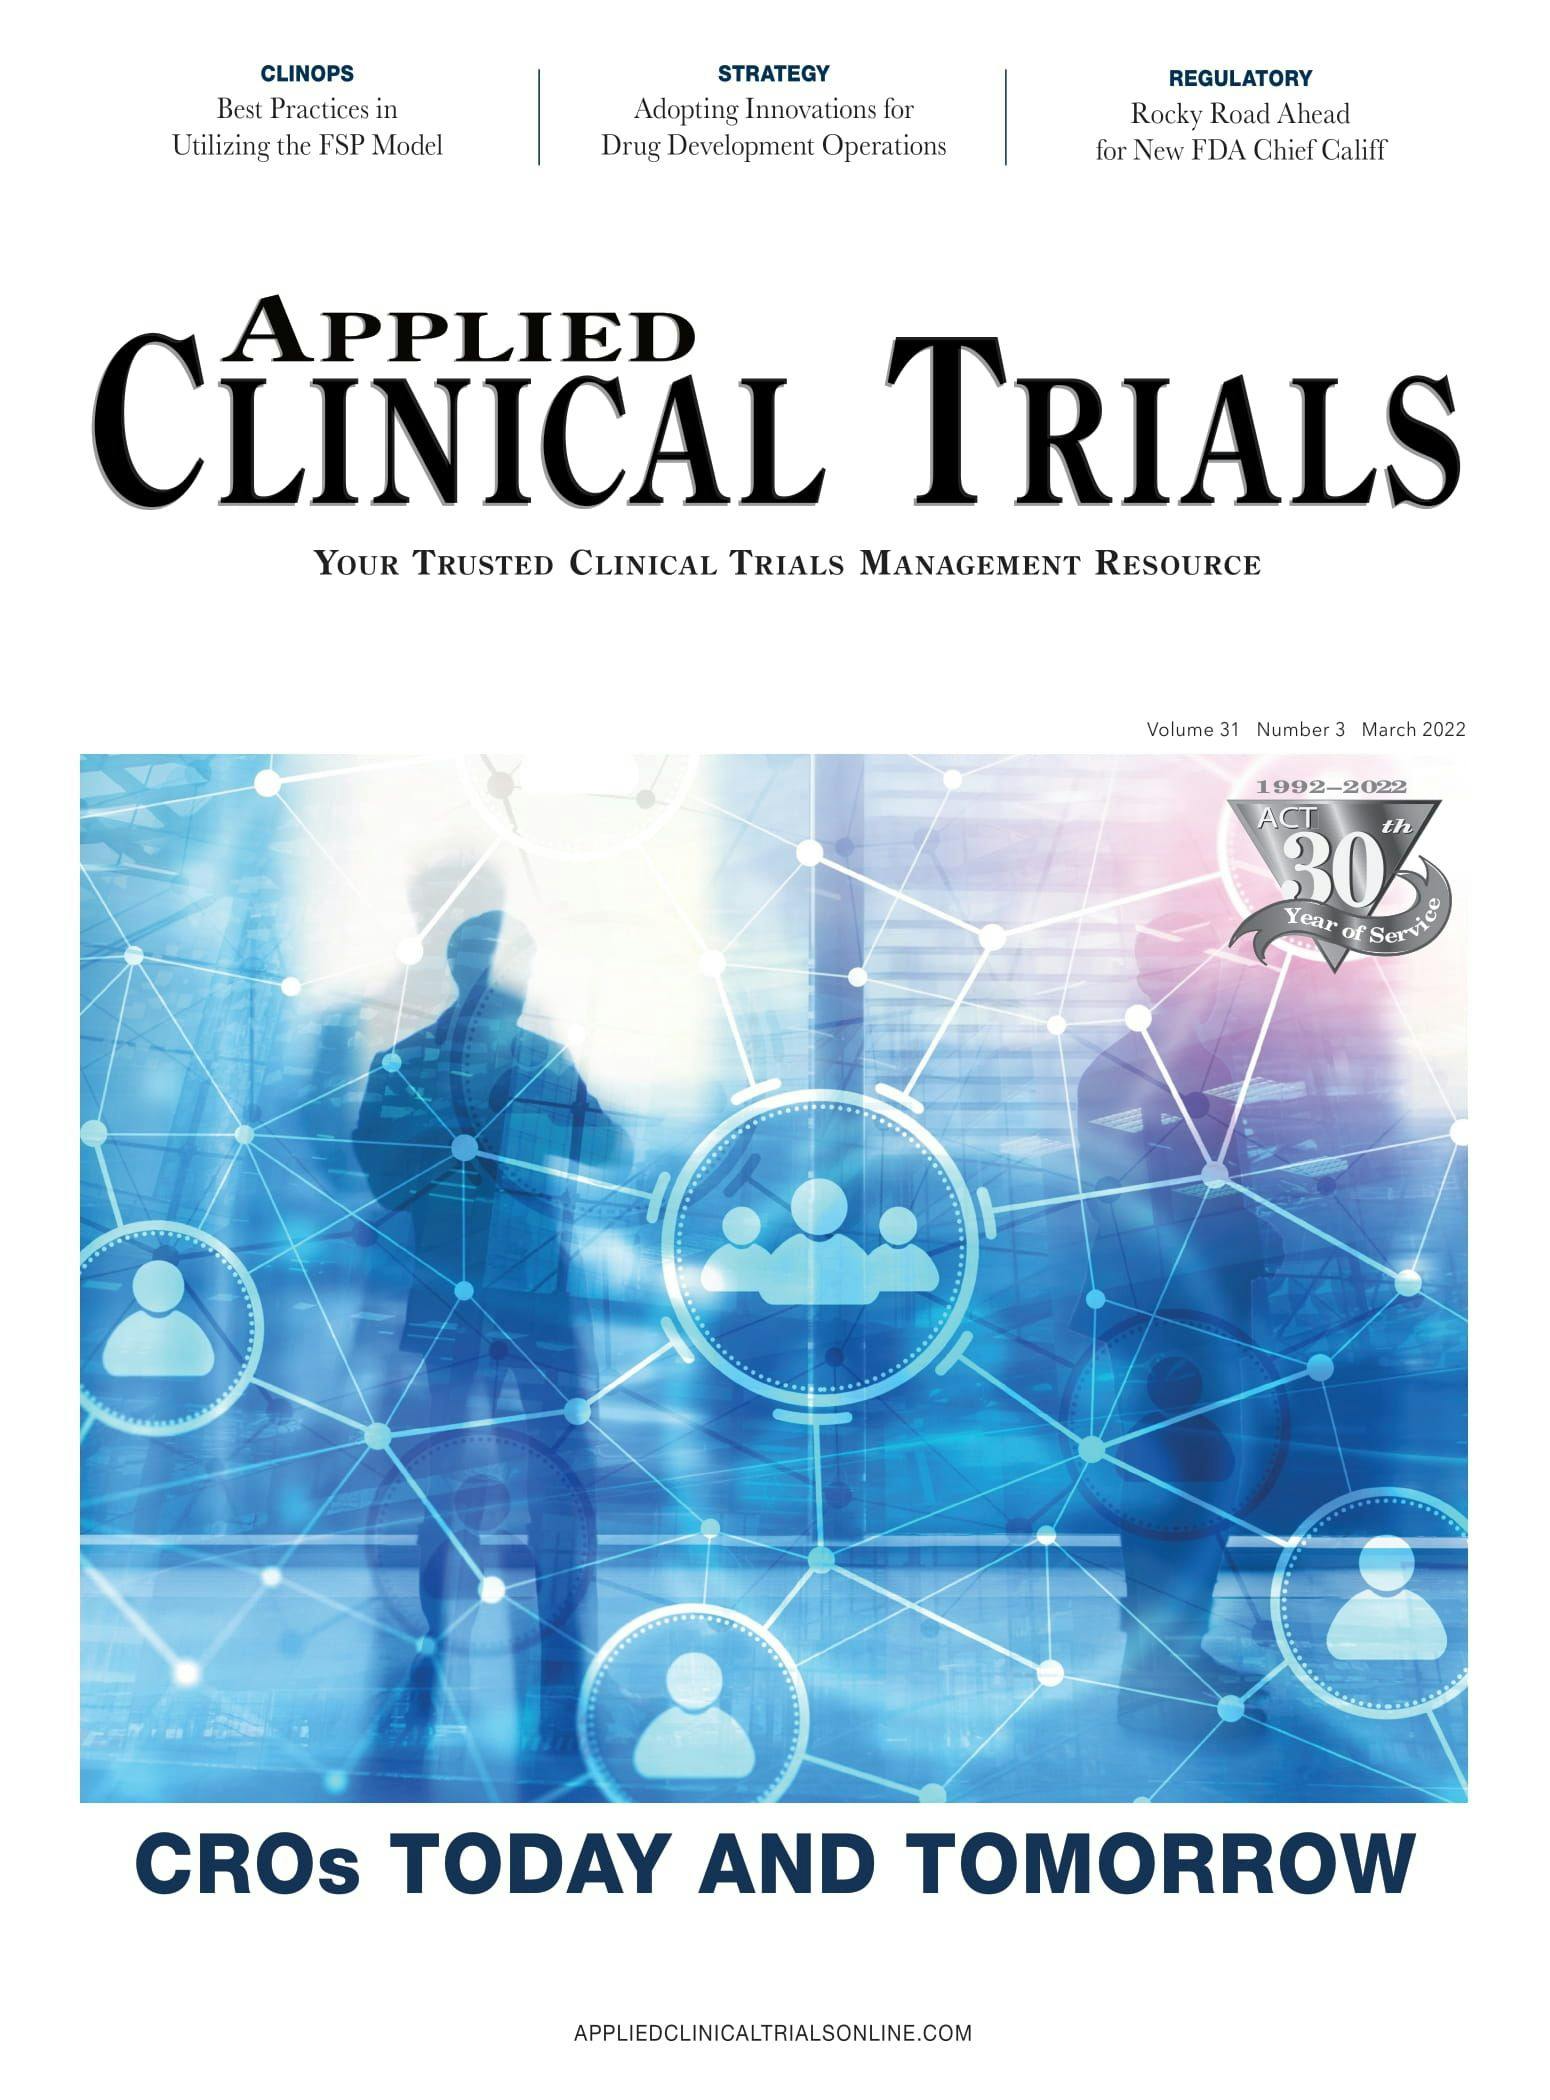 Applied Clinical Trials-03-01-2022